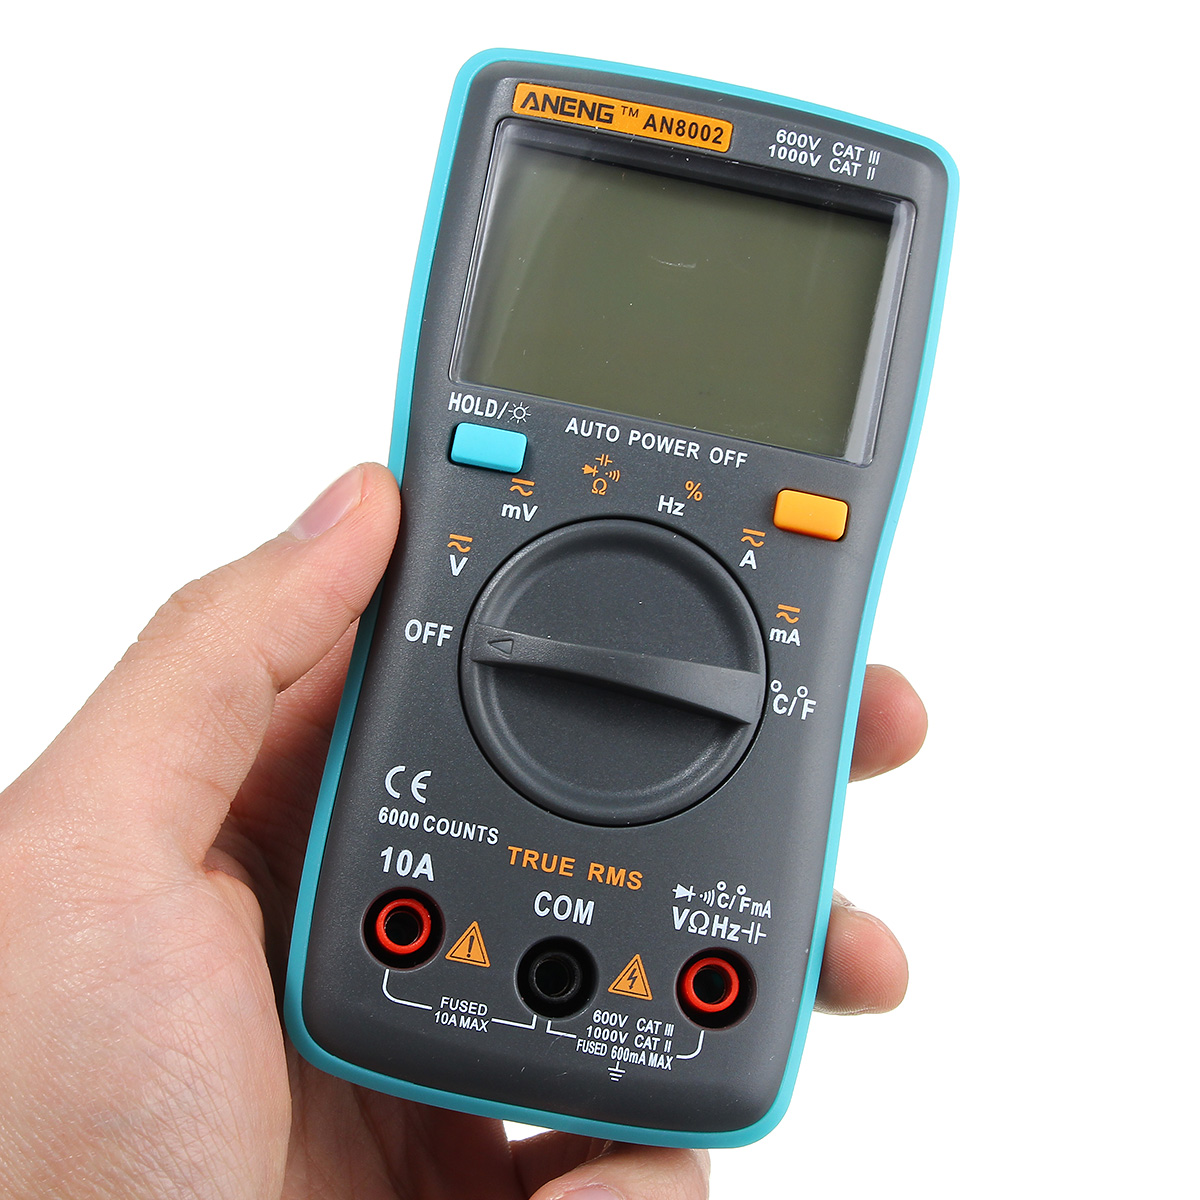 ANENG AN8002 Digital True RMS 6000 Counts Multimeter AC/DC Current Voltage Frequency Resistance Temperature Tester ℃/℉ 58